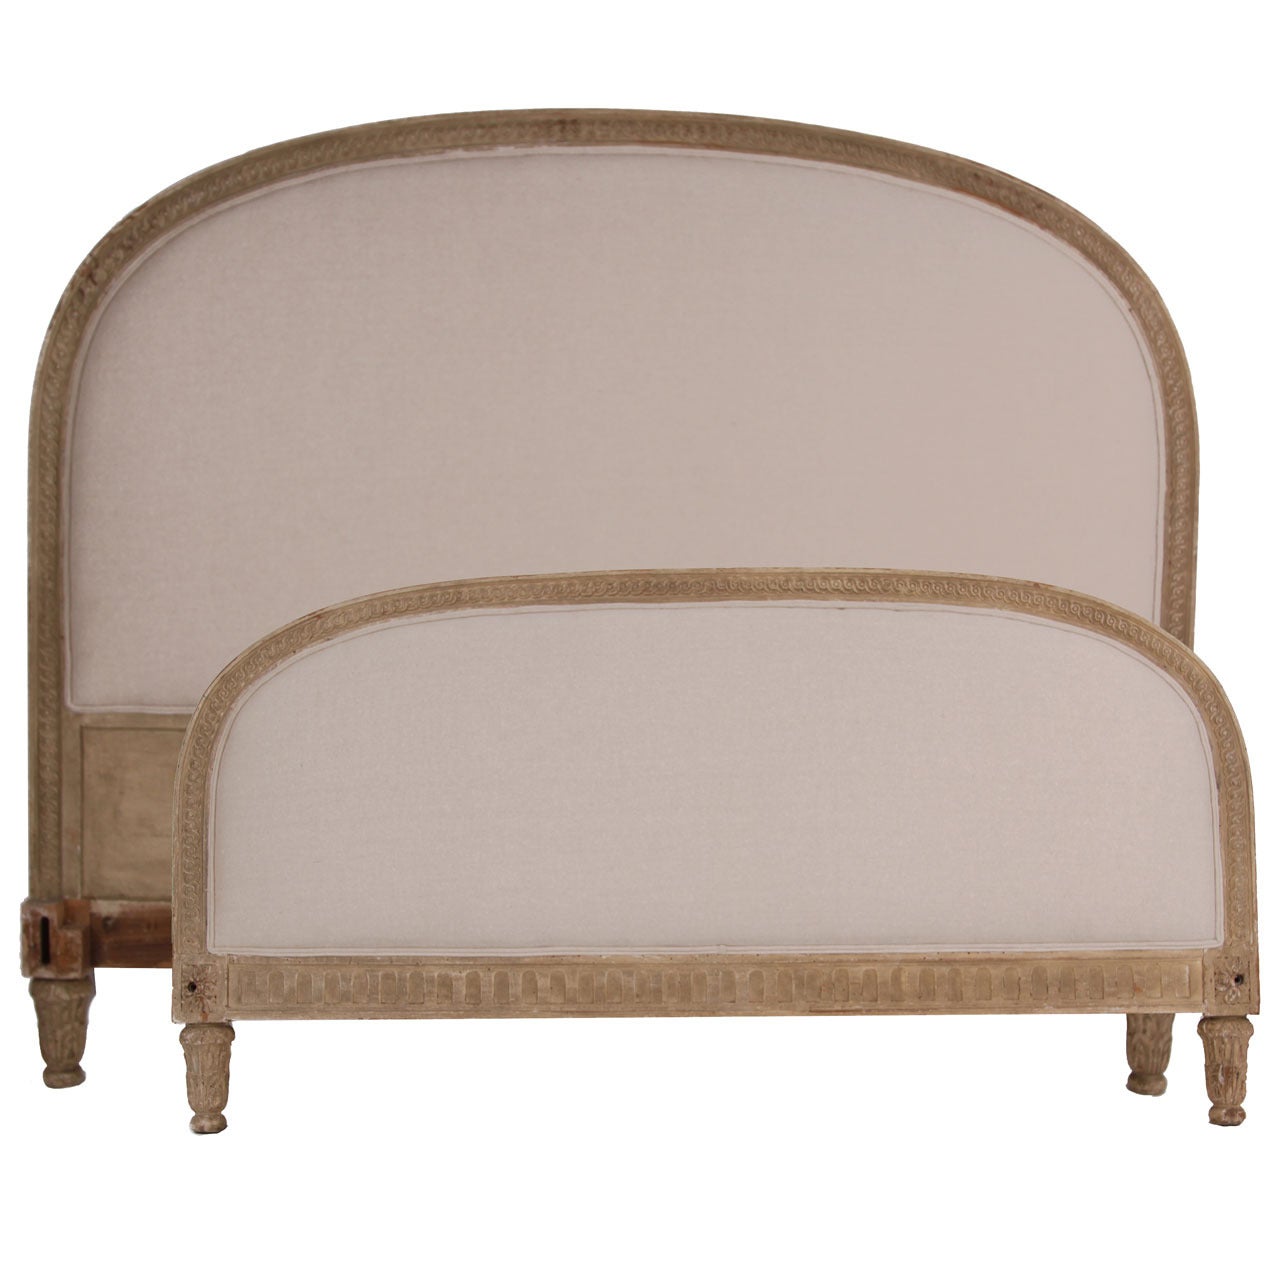 Antique French Bed, Louis XVI style - Headboard, Footboard, Siderails For Sale